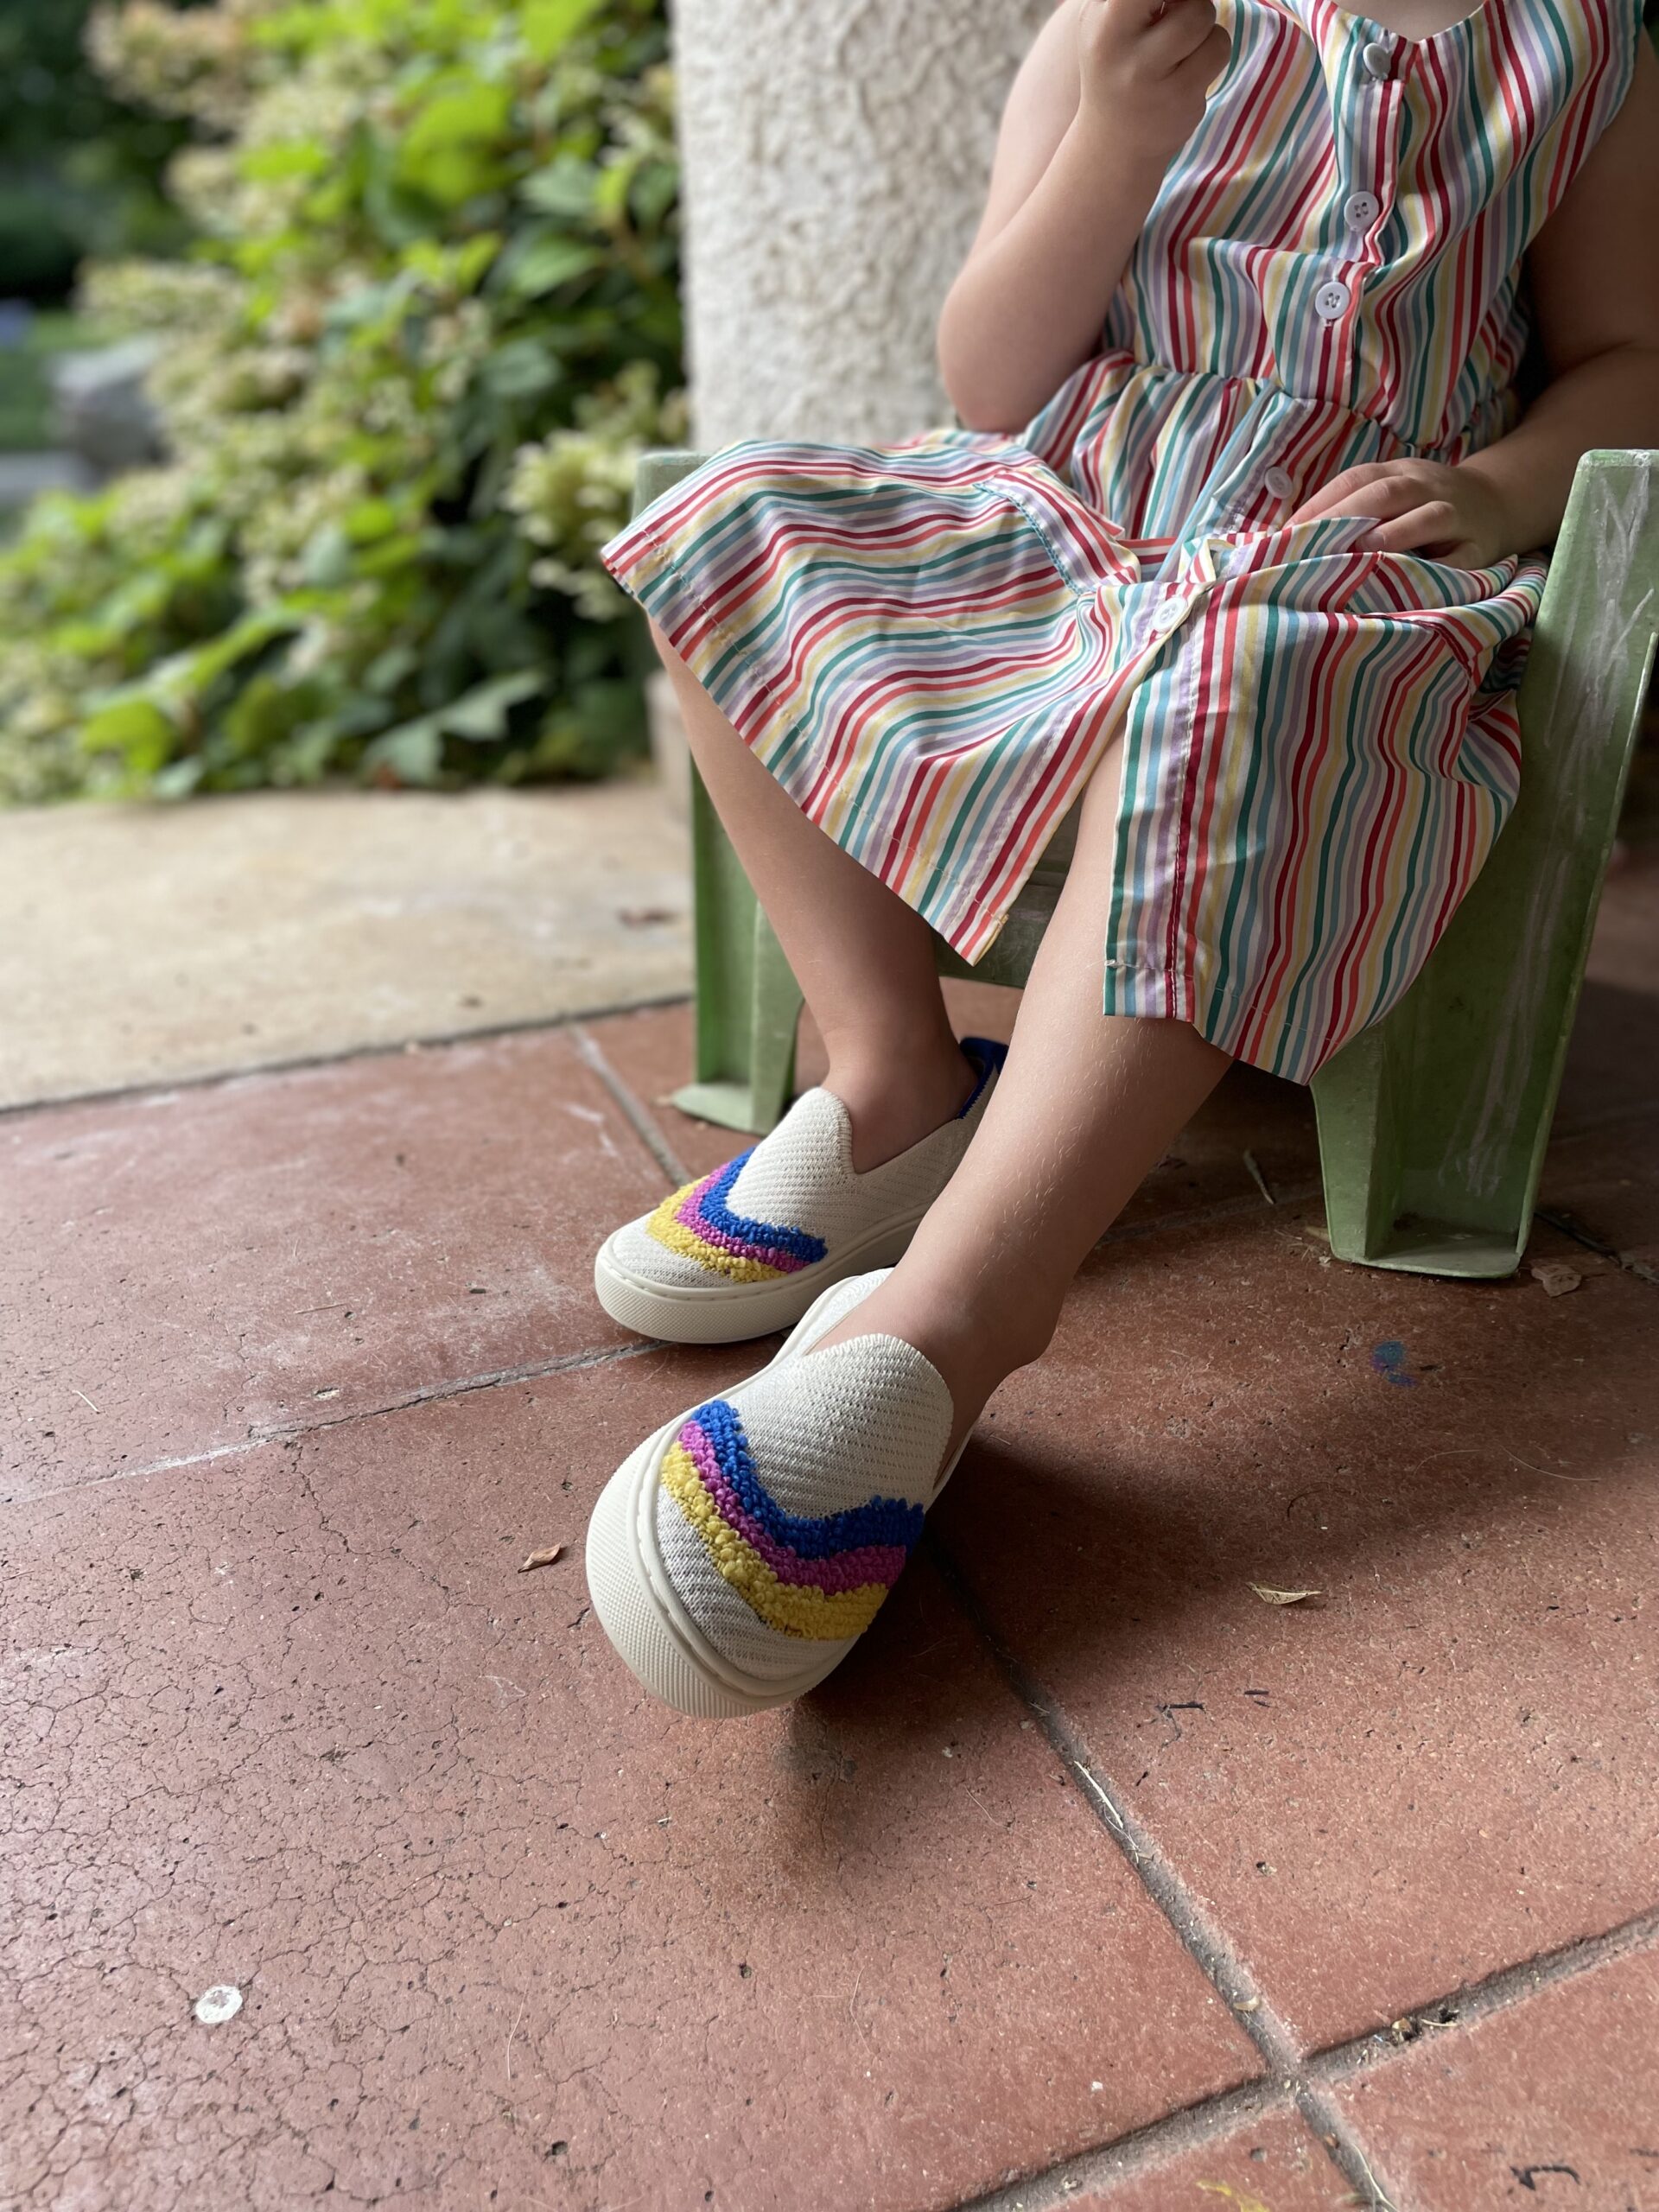 A little girl lounging in a tiny chair wearing Rothys.